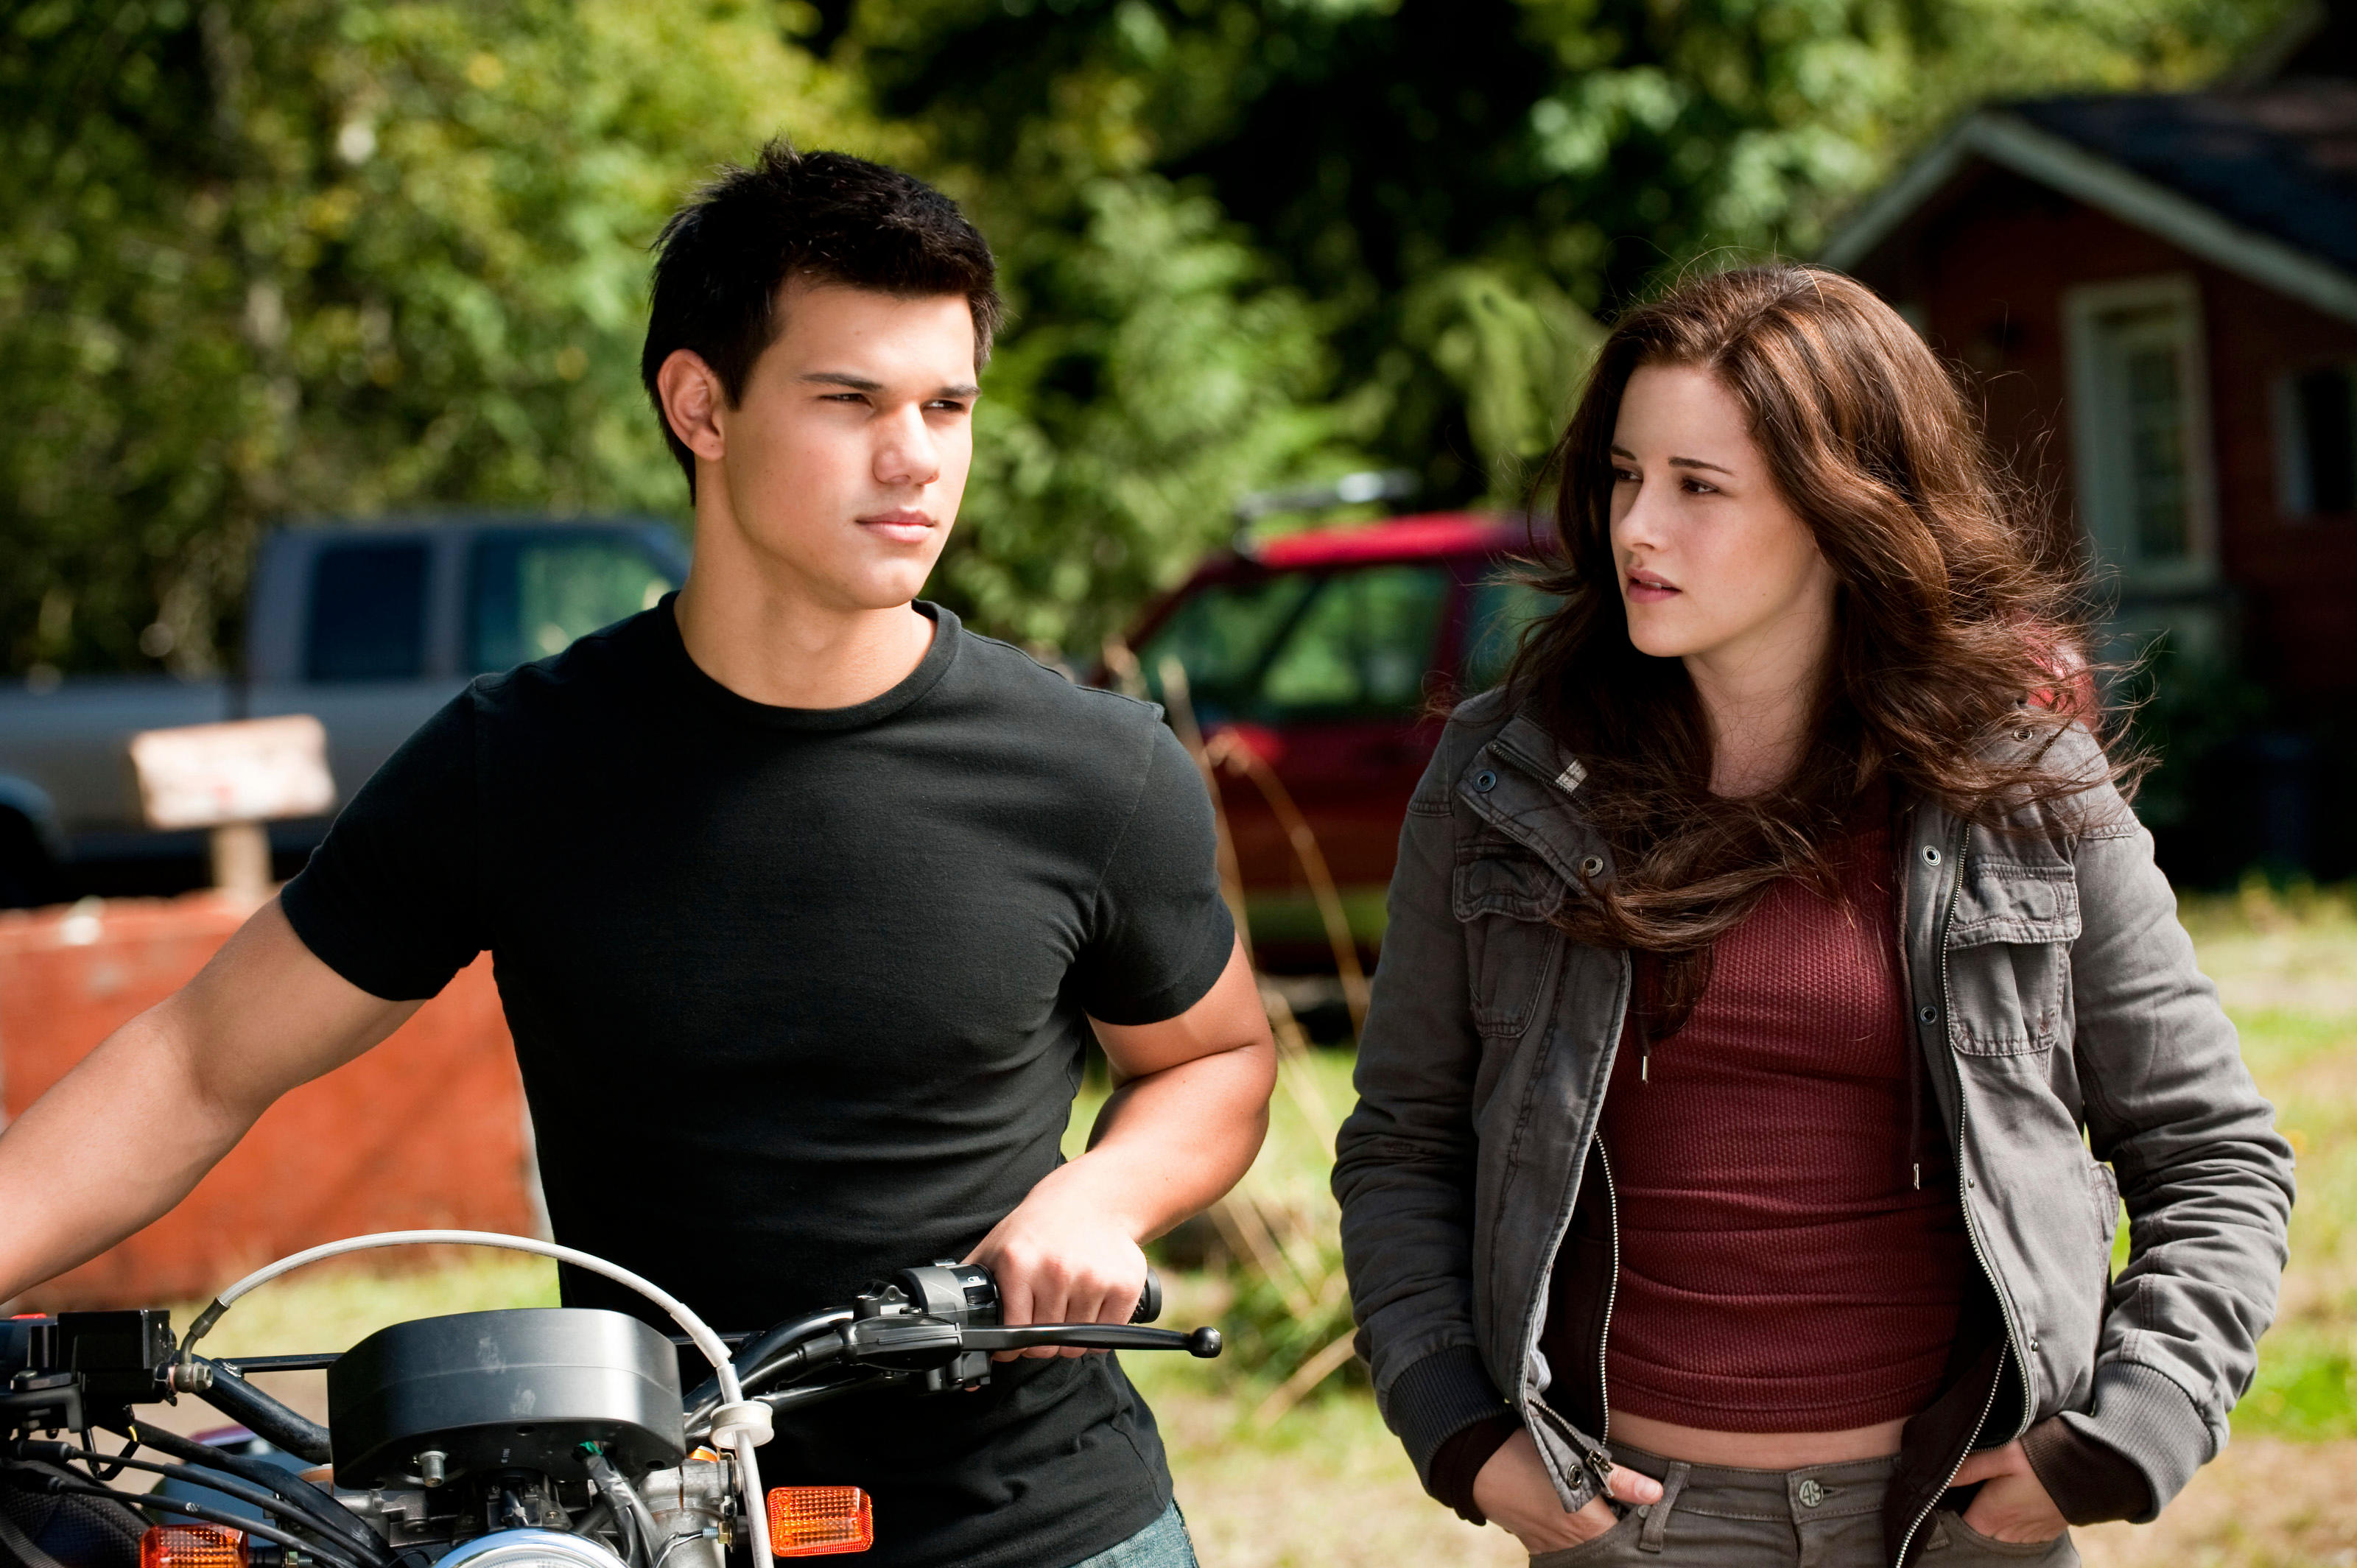 Taylor rose to fame after his role as Jacob in The Twilight Saga